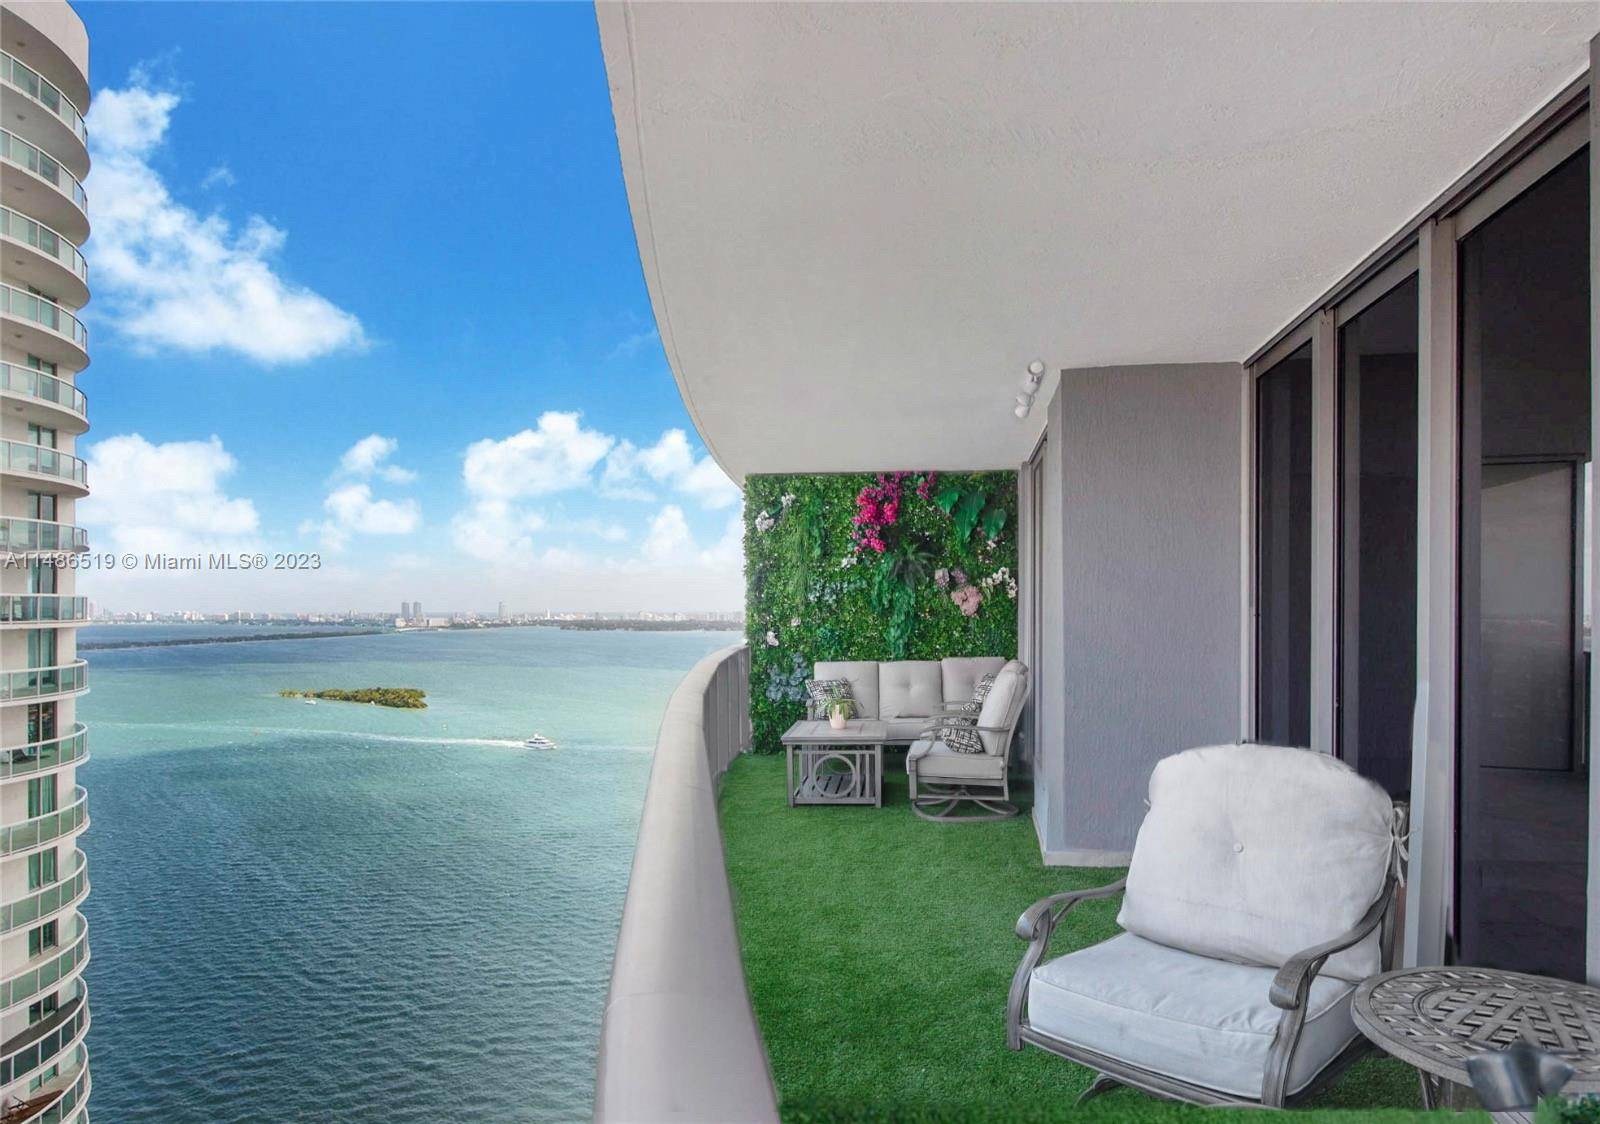 Aria on the Bay is a luxury high rise development designed by Arquitectonica located in Edgewater Miami.